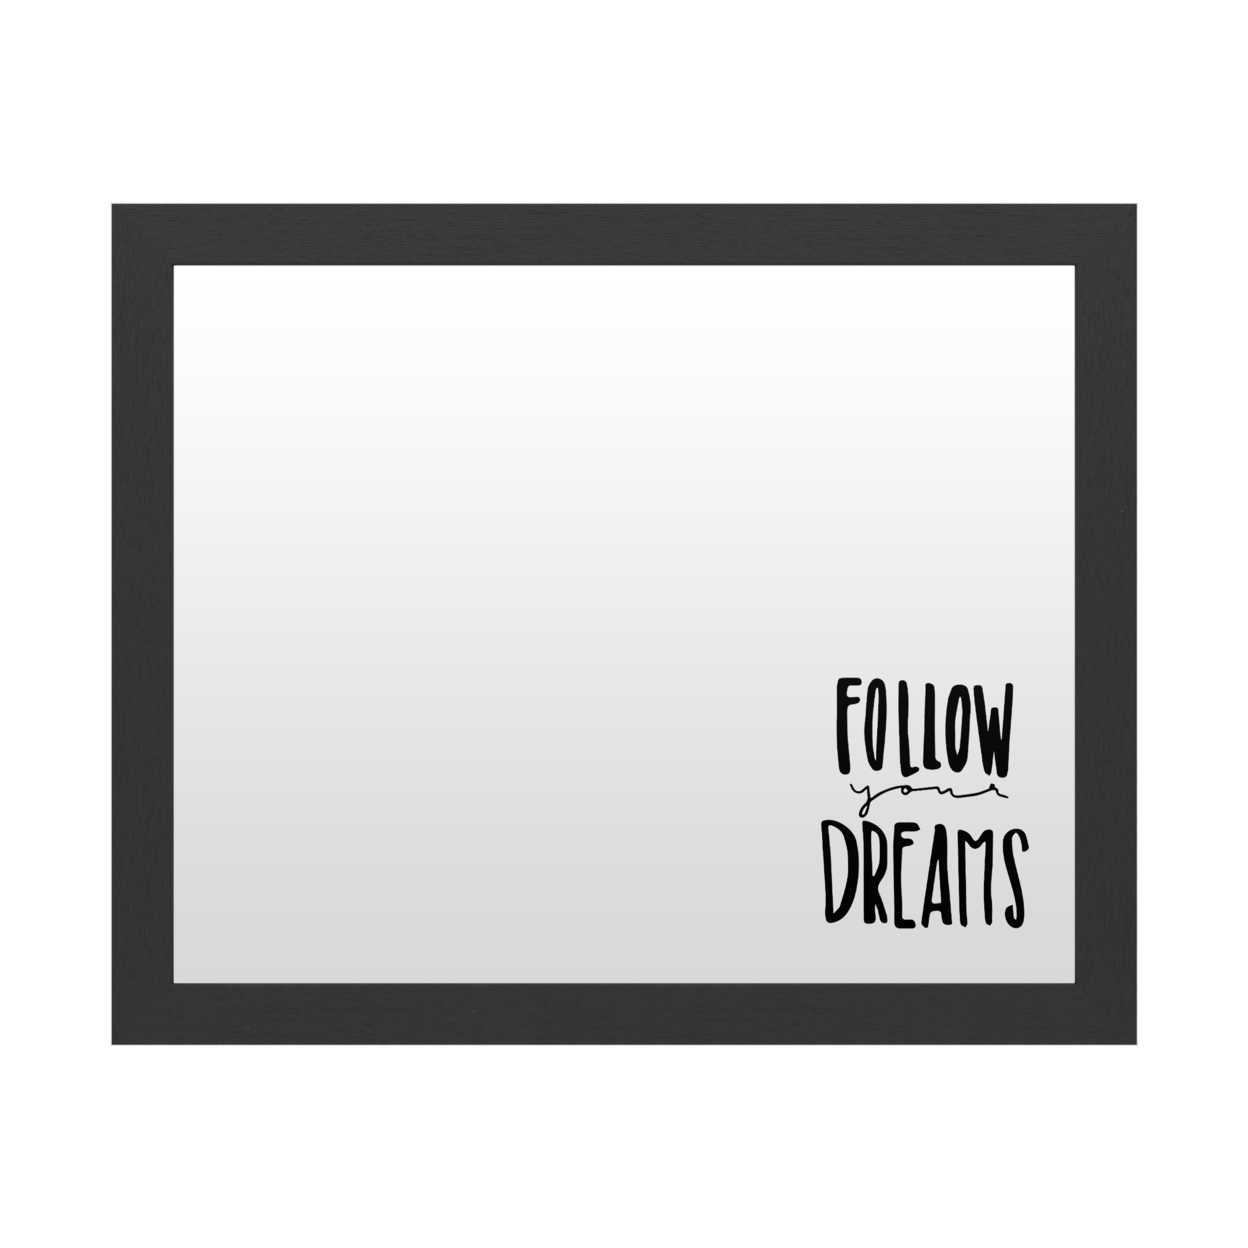 Dry Erase 16 X 20 Marker Board With Printed Artwork - Follow Your Dreams White Board - Ready To Hang